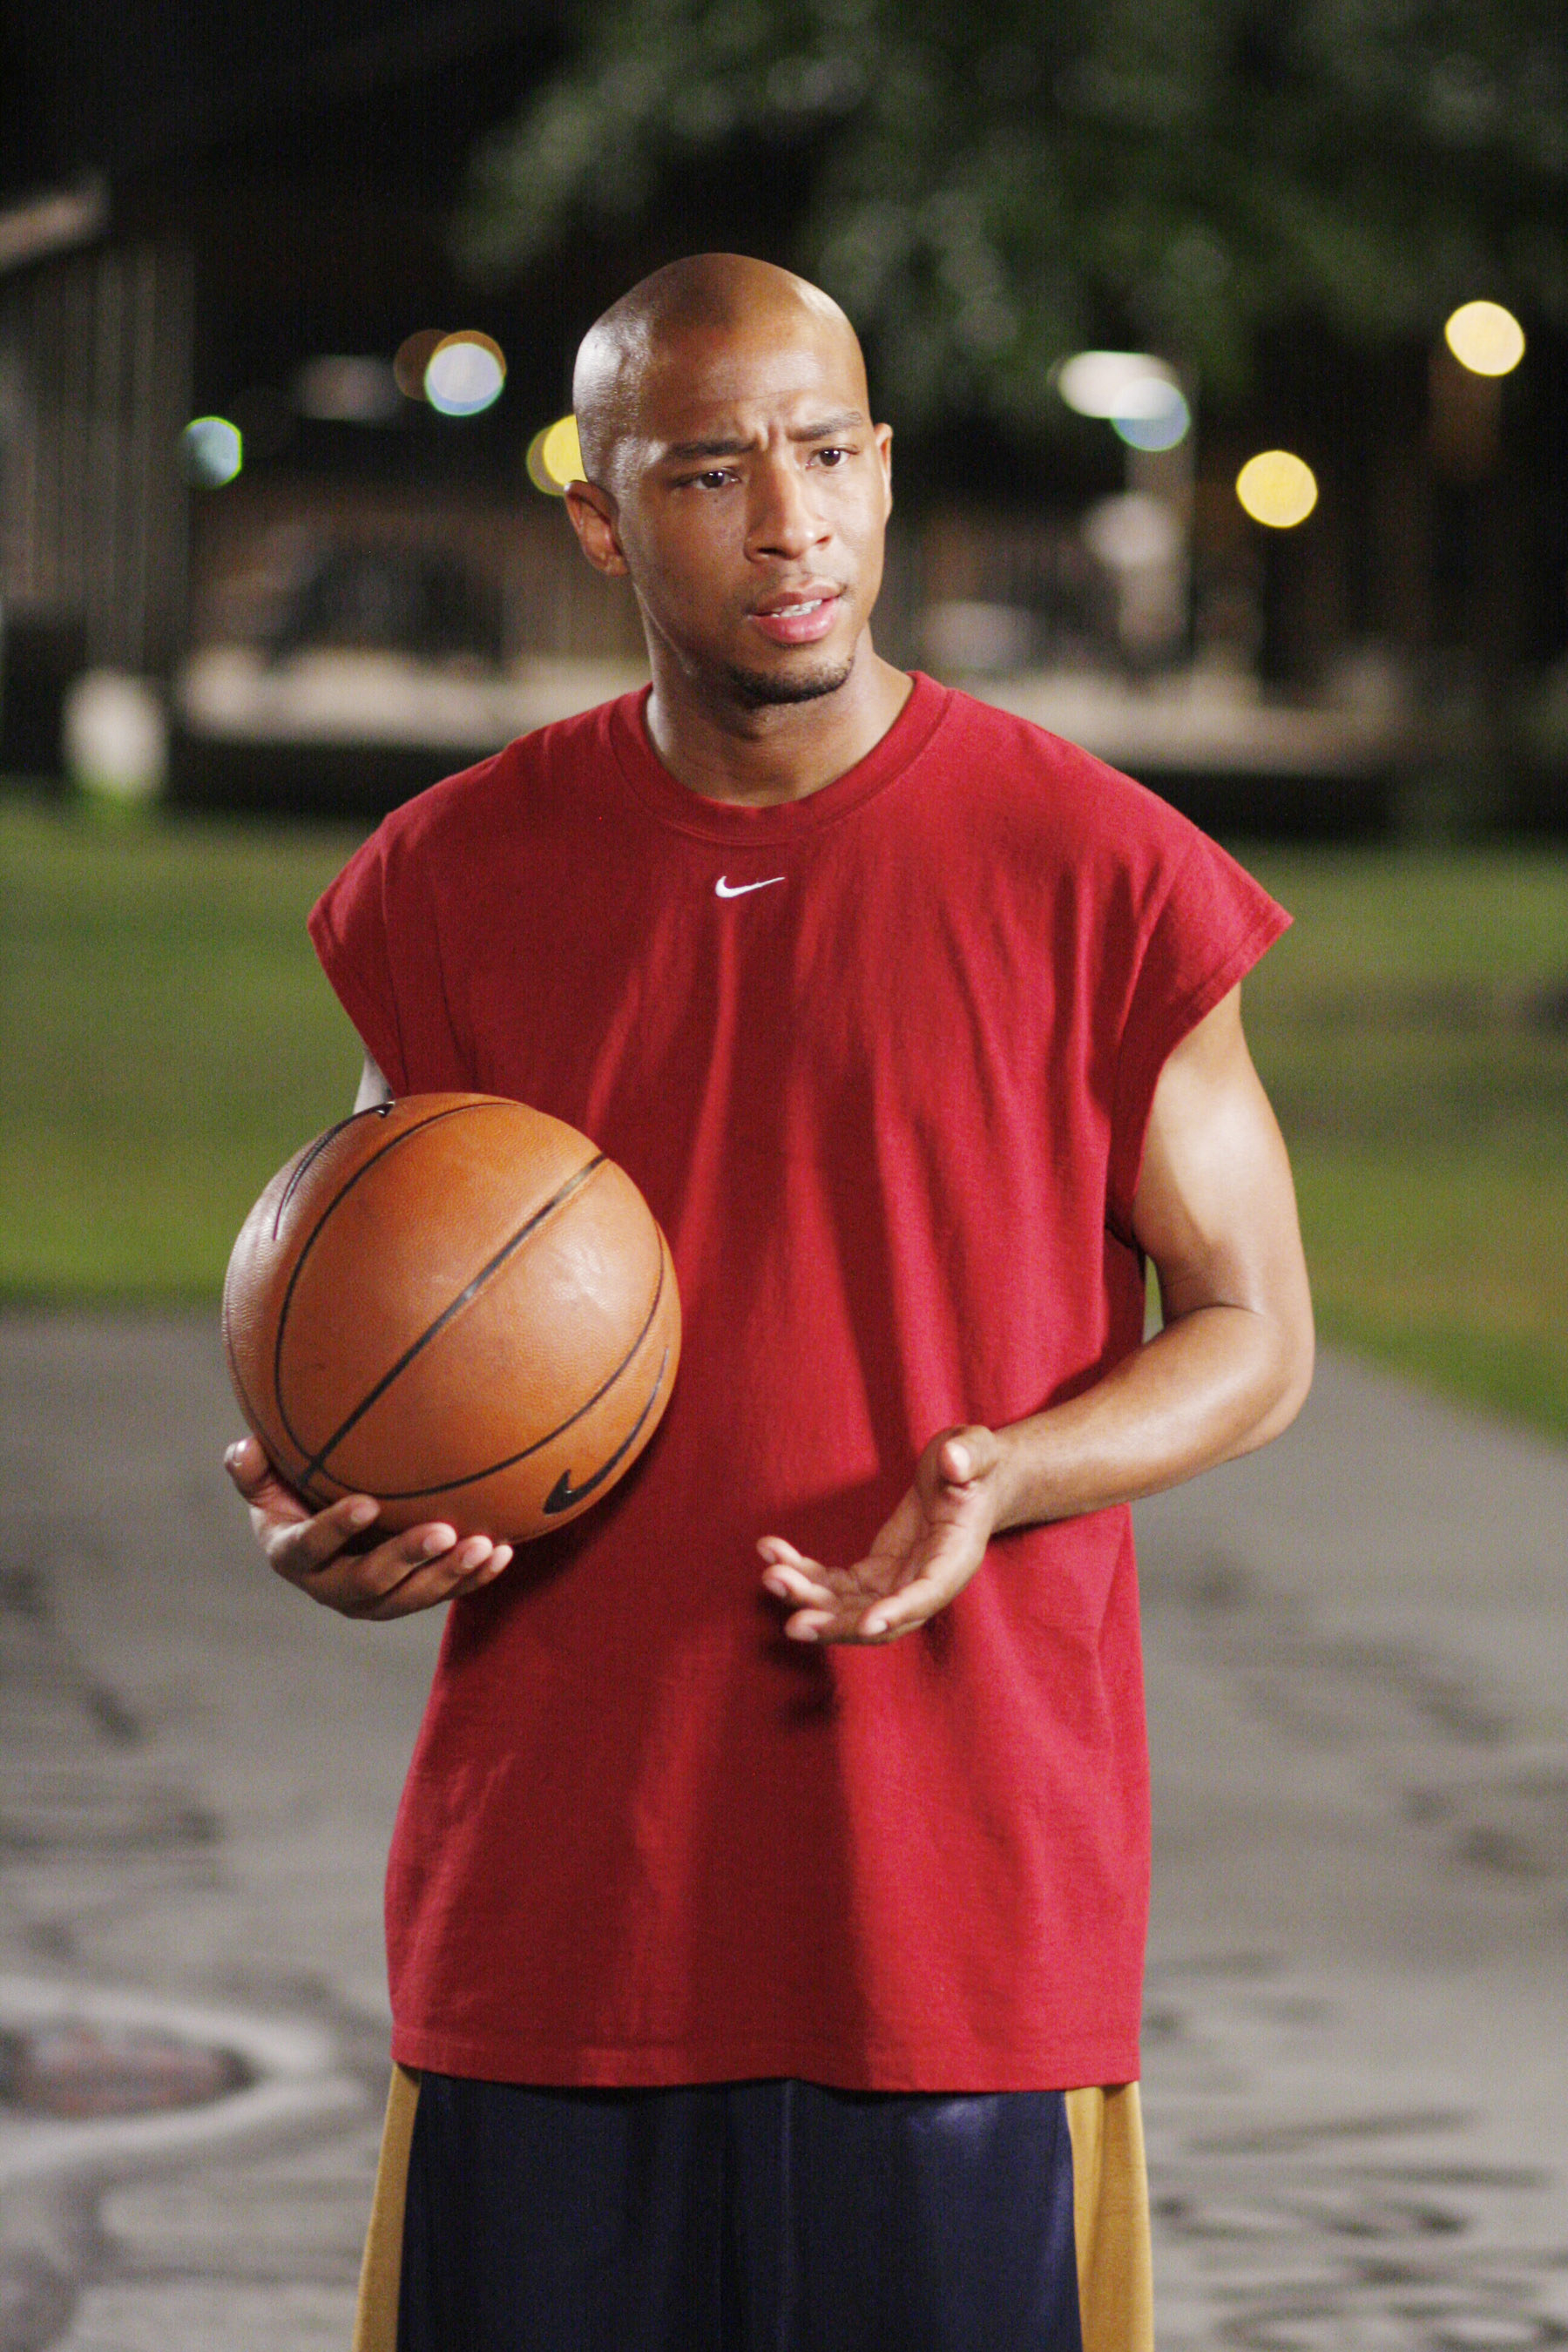 Antwon Tanner playing basketball on &quot;One Tree Hill&quot;